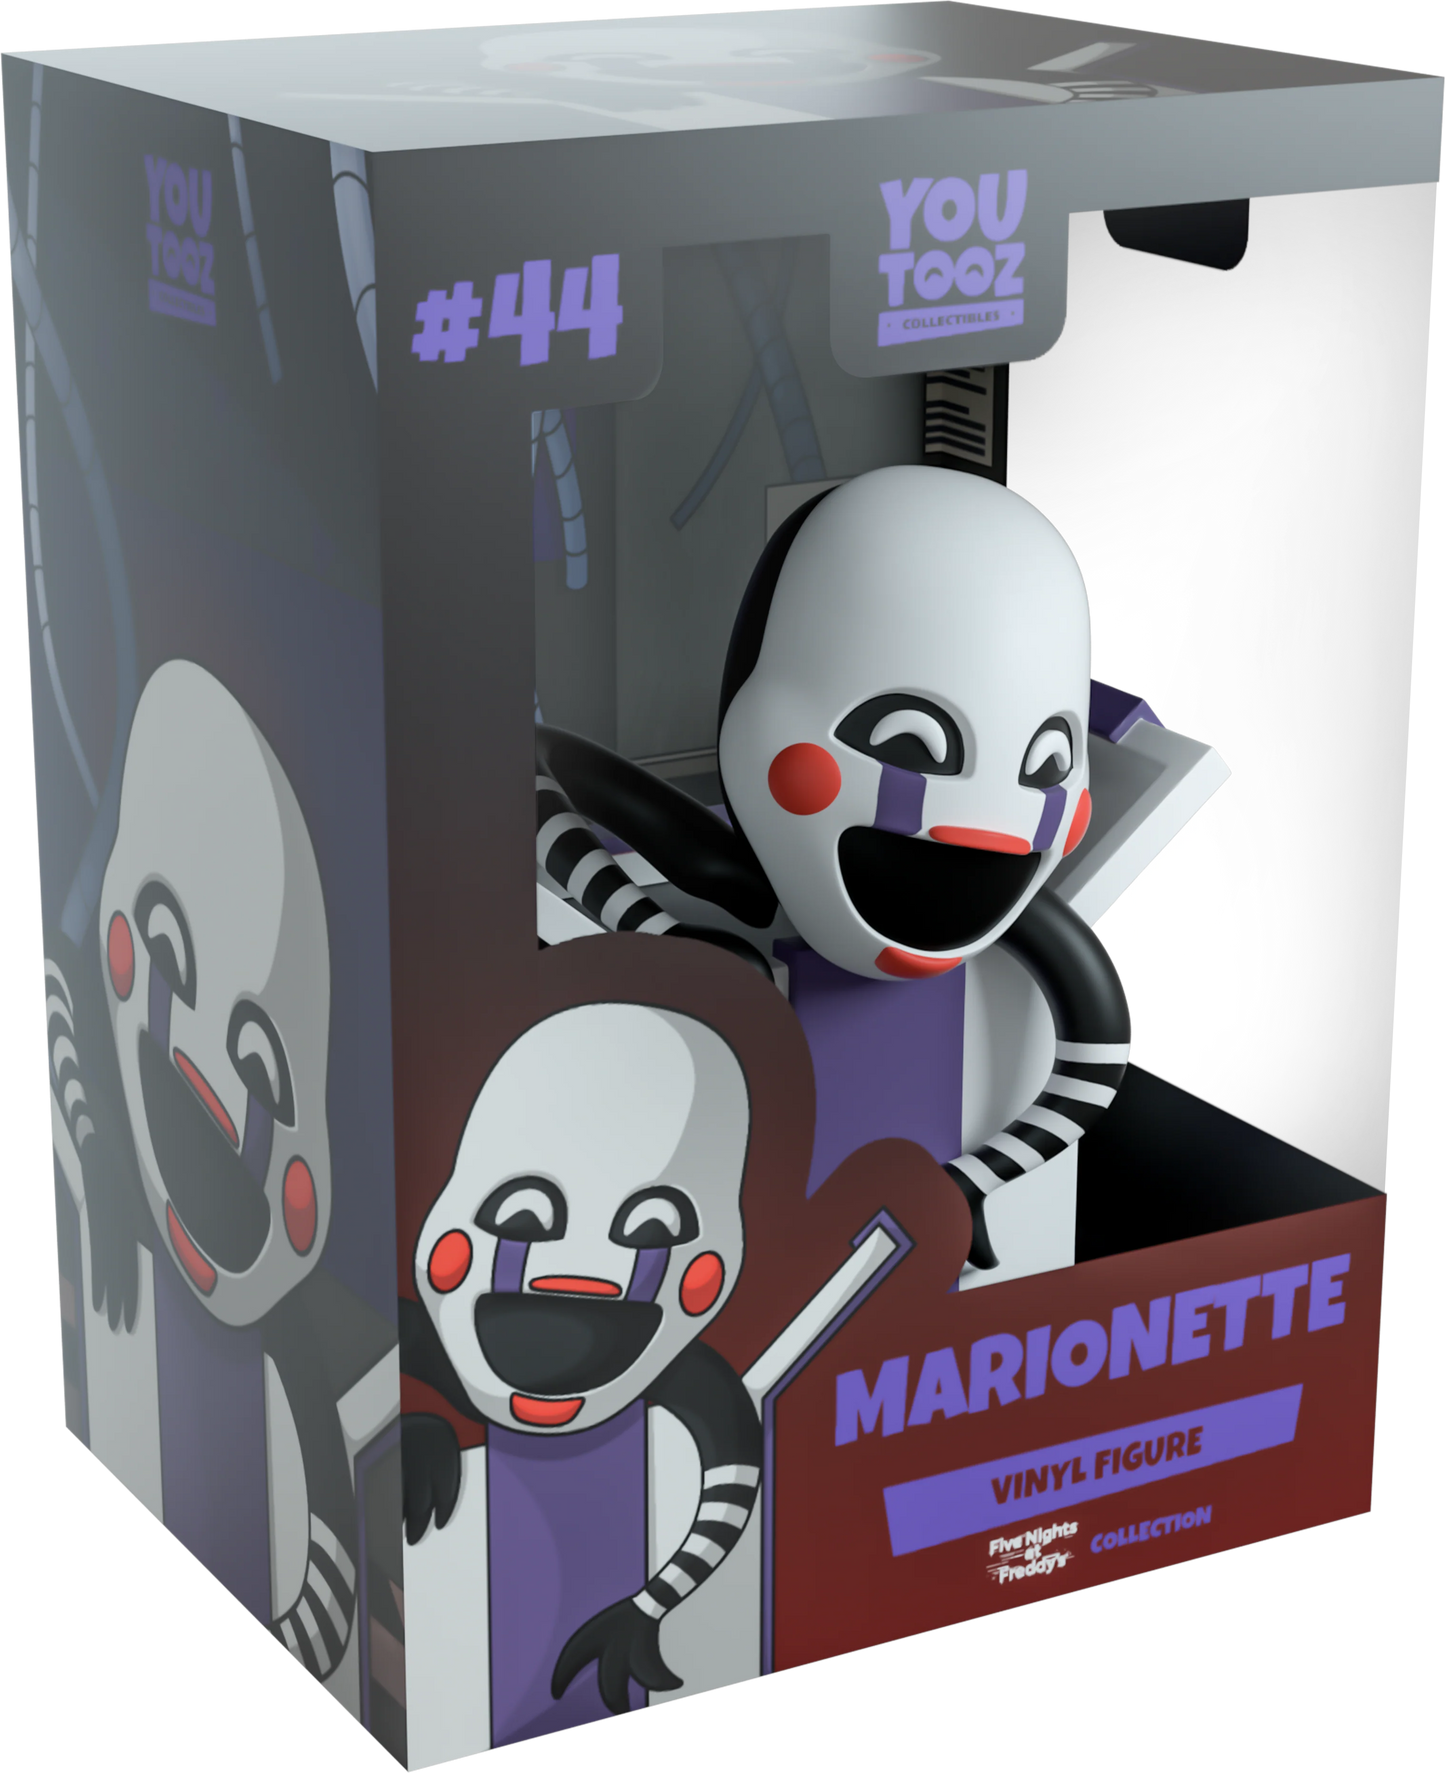 Five Nights At Freddys Marionette Youtooz Vinyl Figure